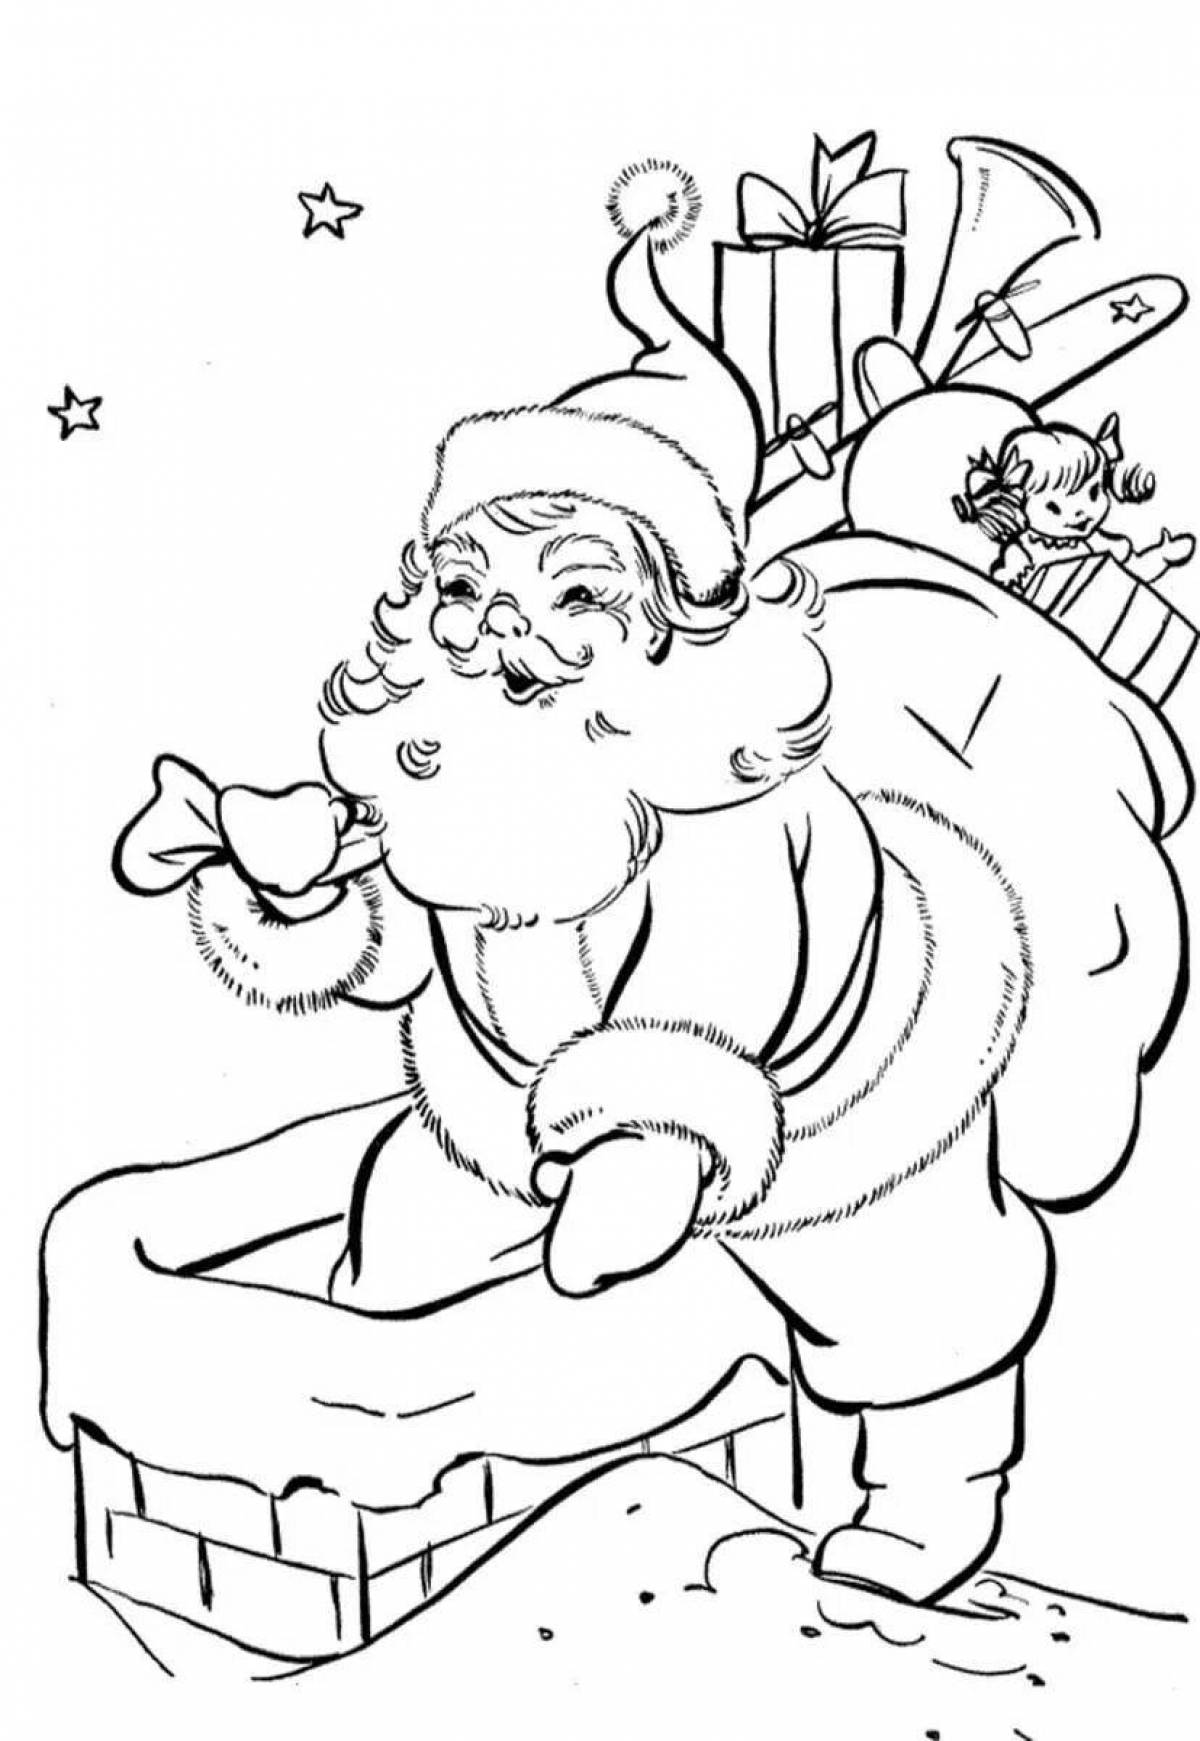 Coloring page adorable santa claus for kids